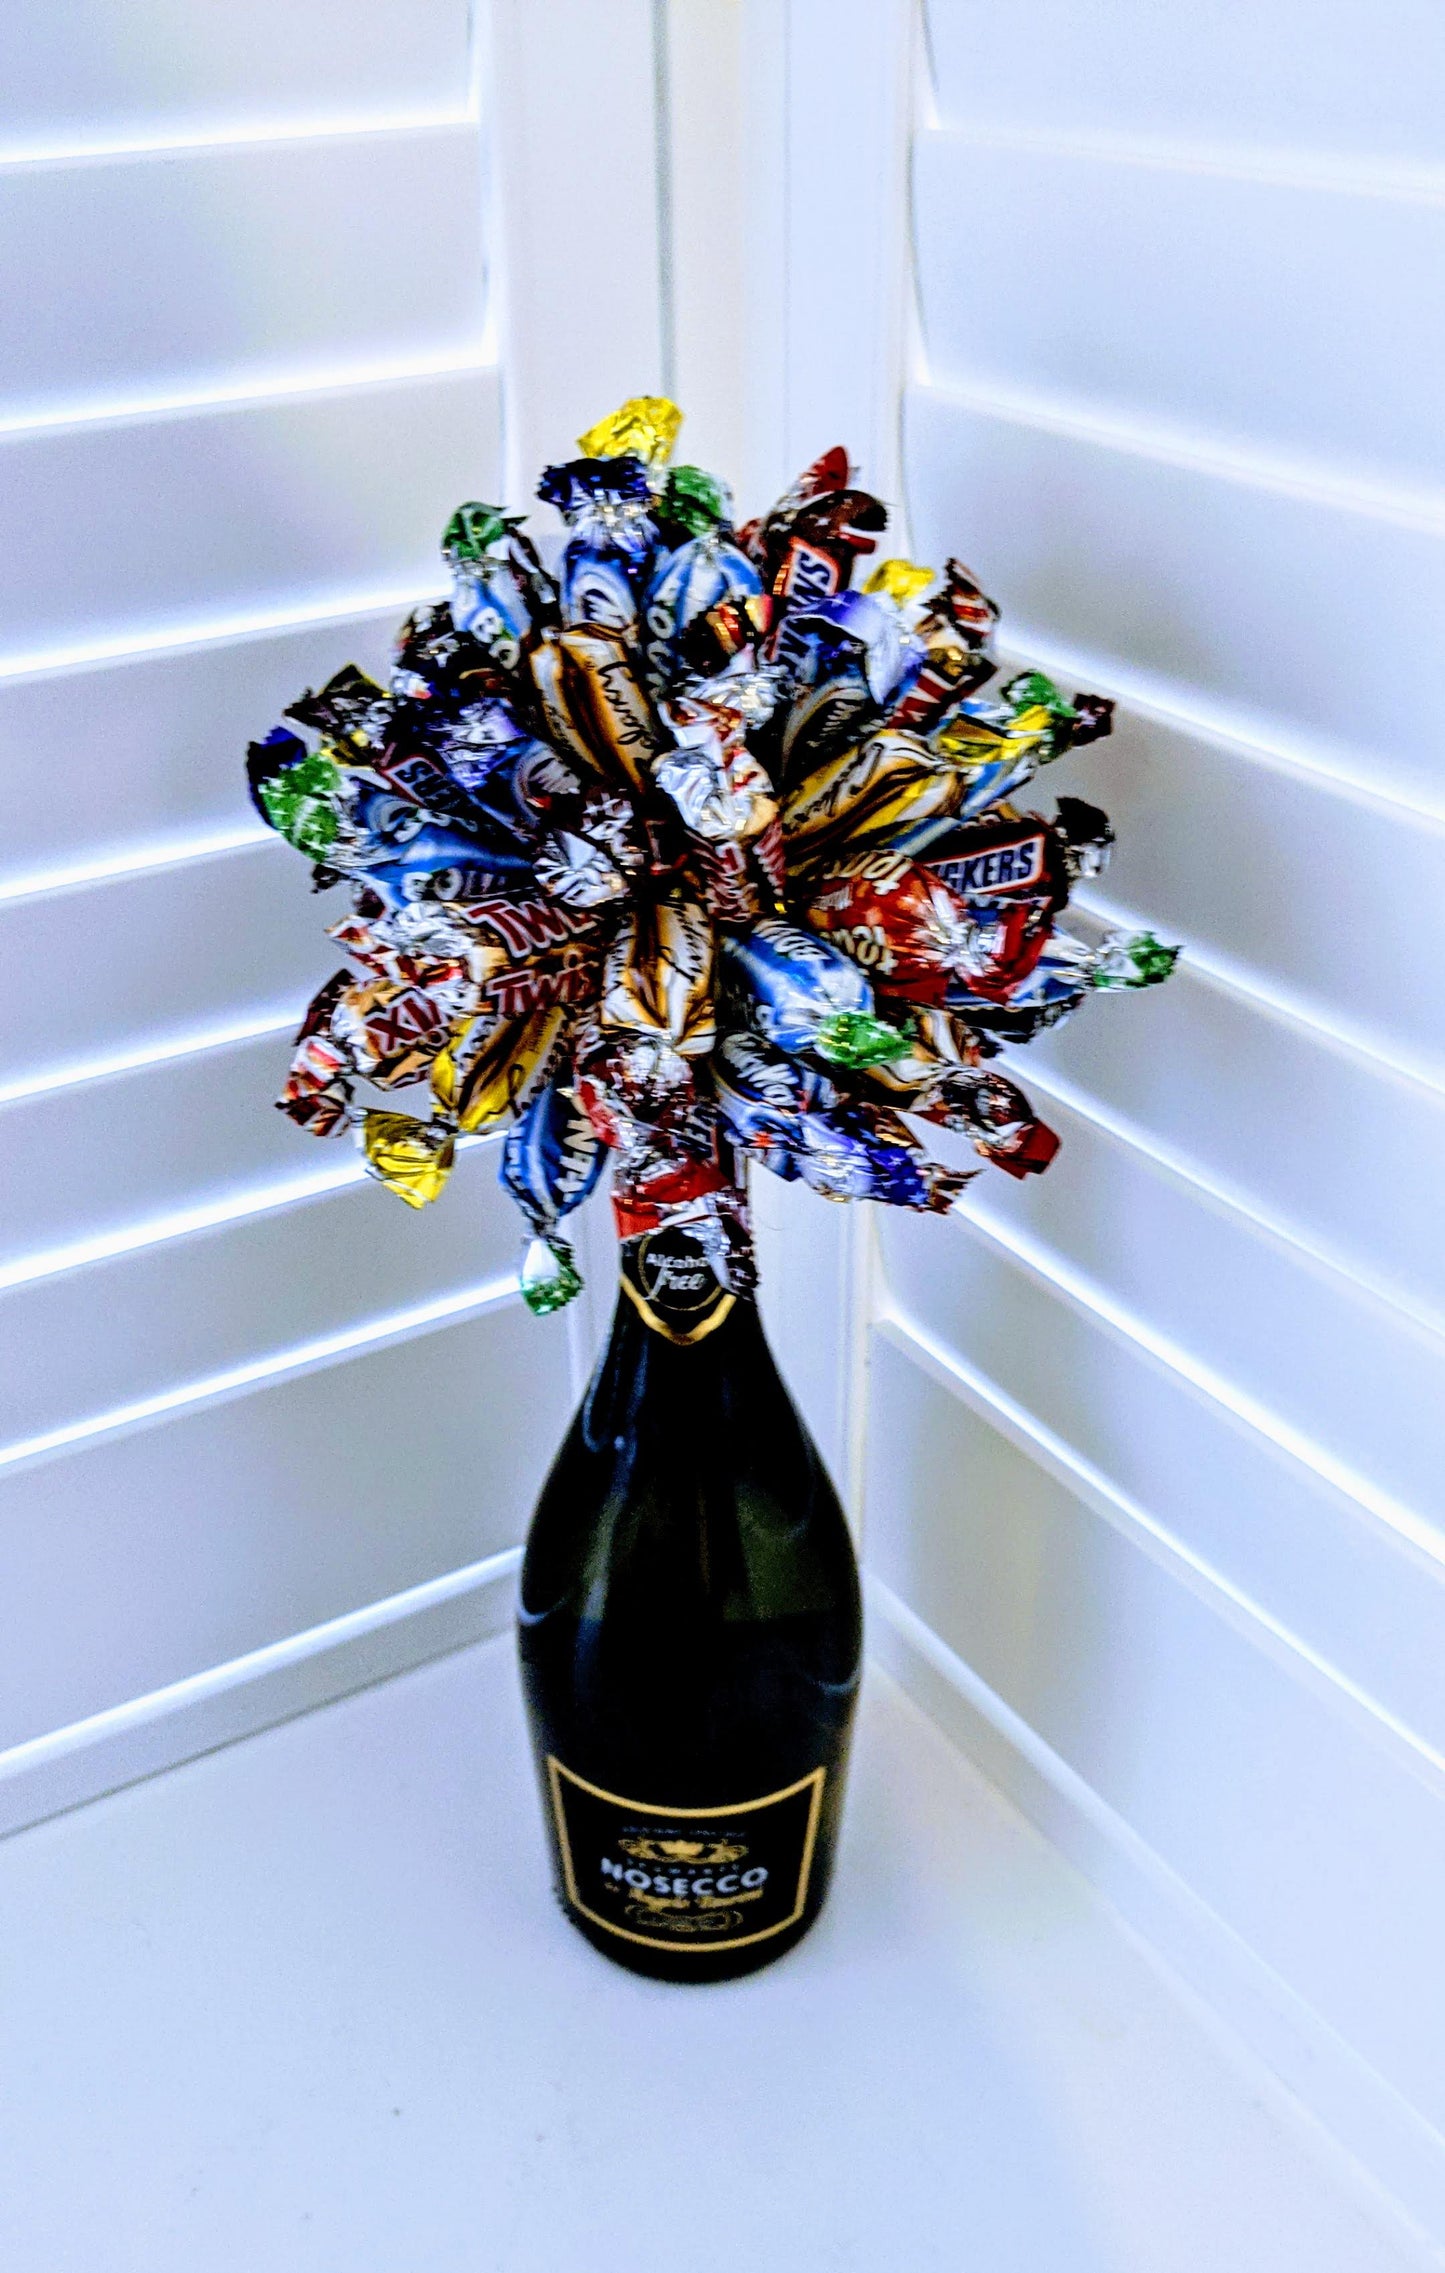 Best Luxury Alcohol Free Prosecco Celebrations Chocolate Bouquets in UK